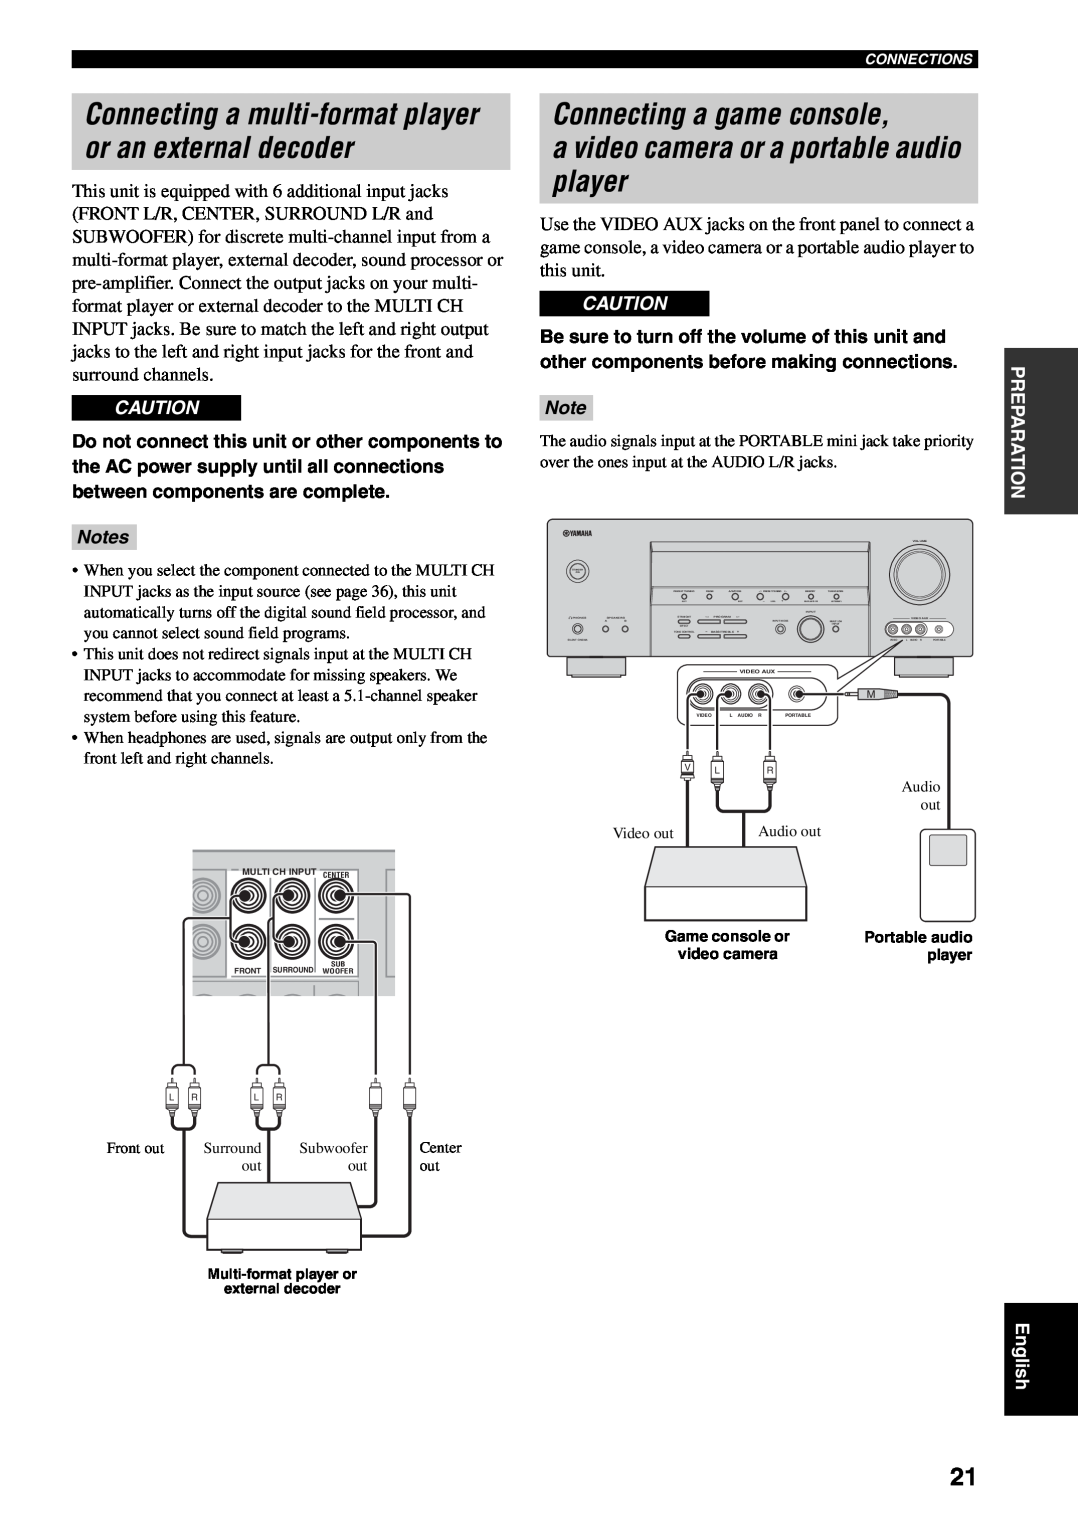 Yamaha RX-V459 owner manual Connecting a game console, a video camera or a portable audio player, Notes 